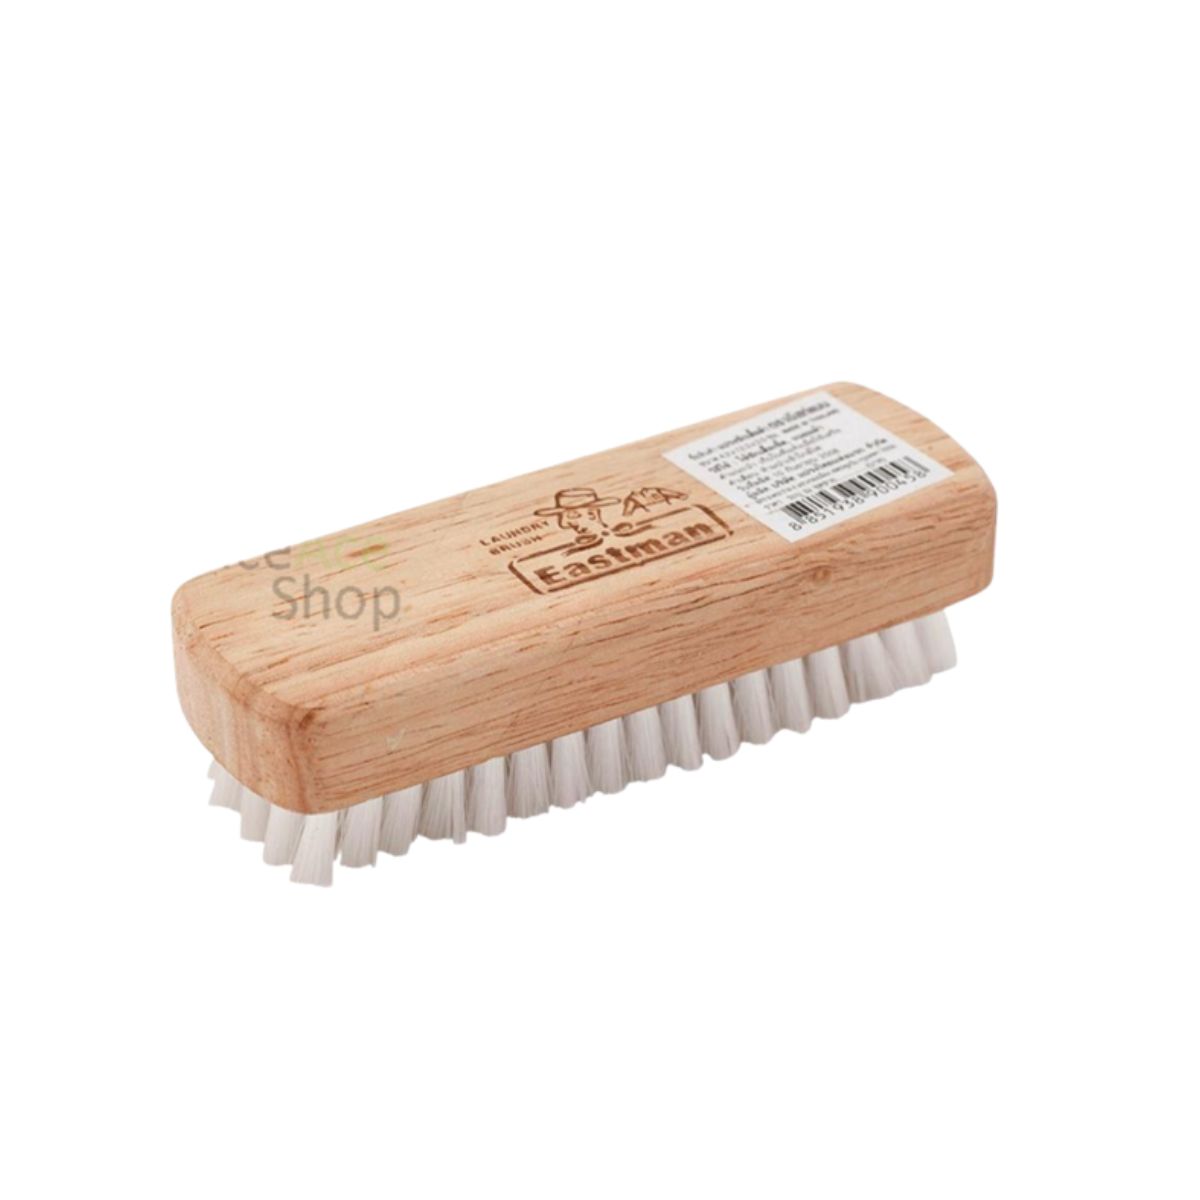 Eastman Laundry Brush - Wooden - Small